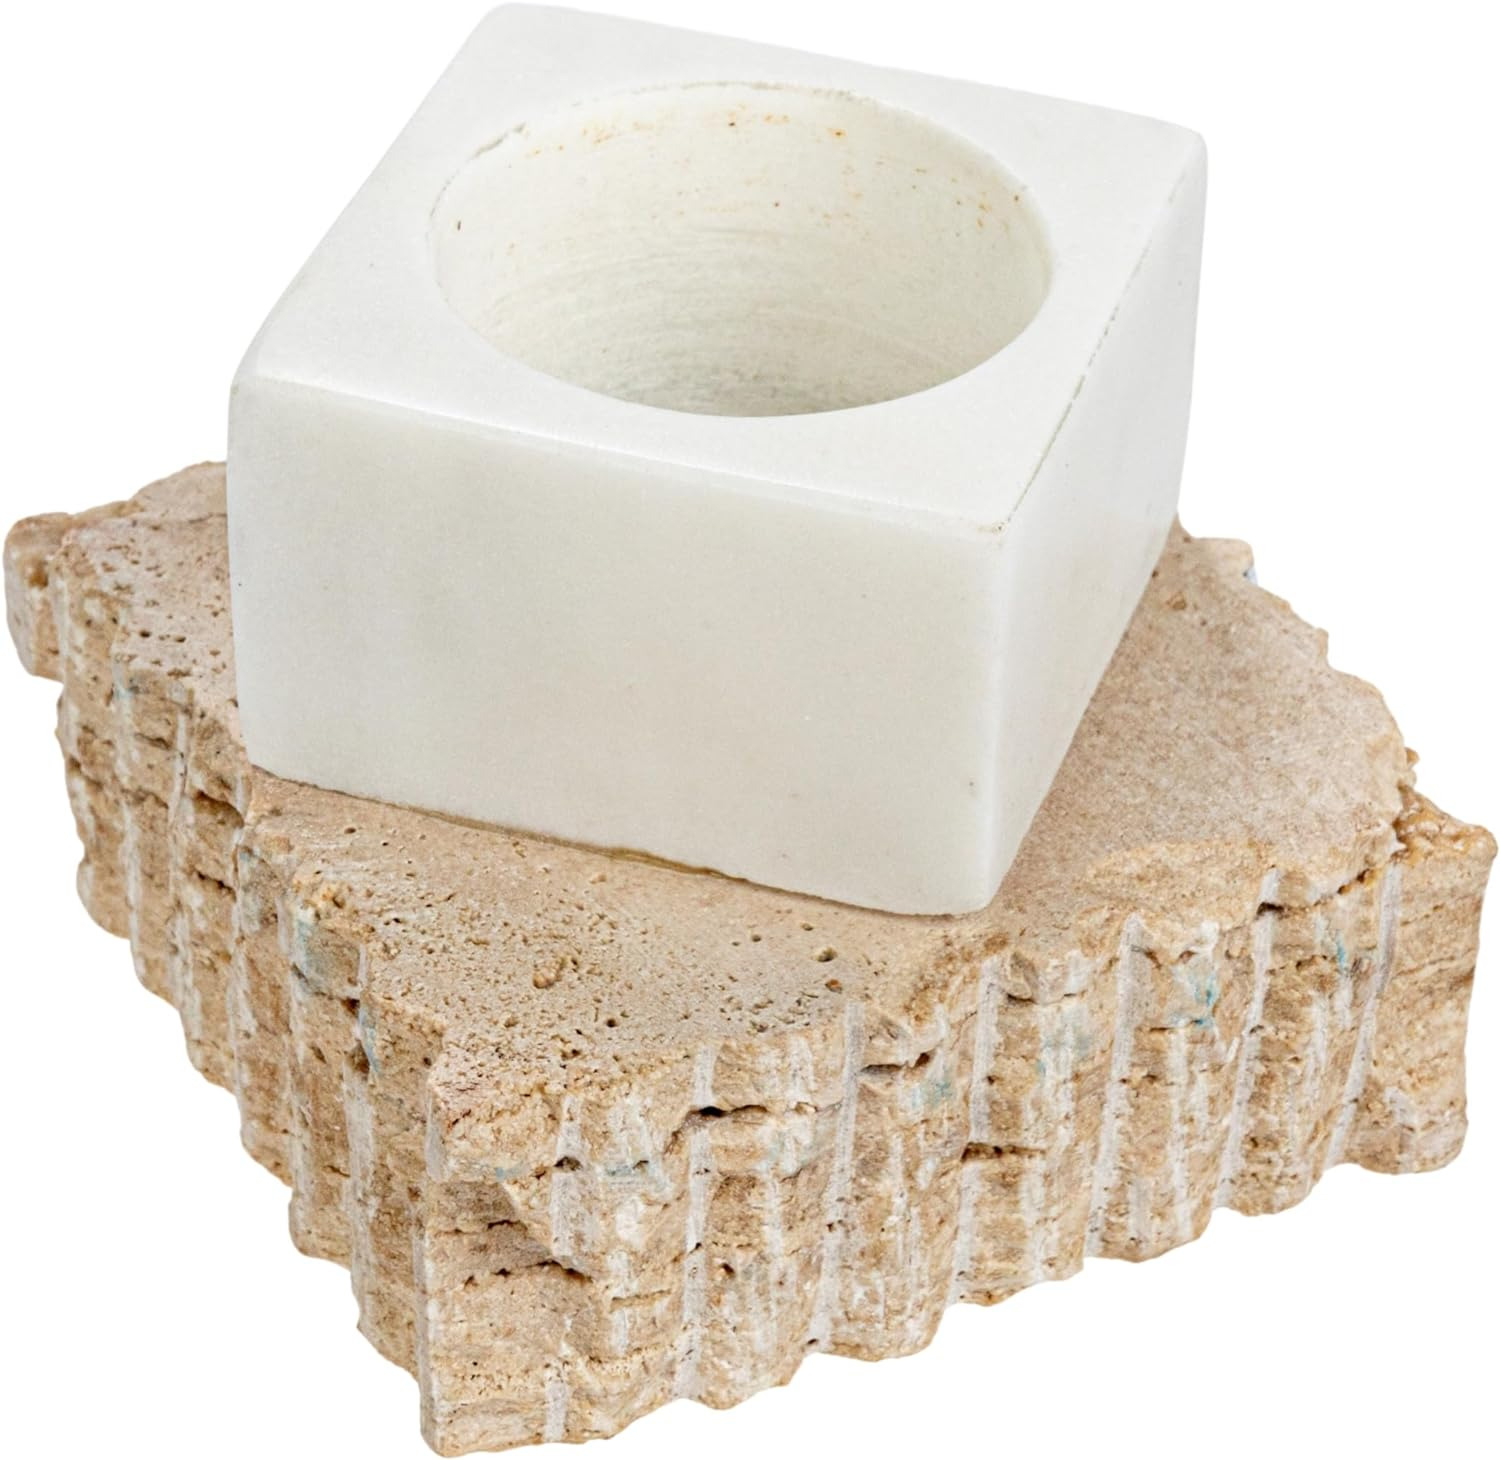 Marble and Travertine Candle Holder, White/Natural